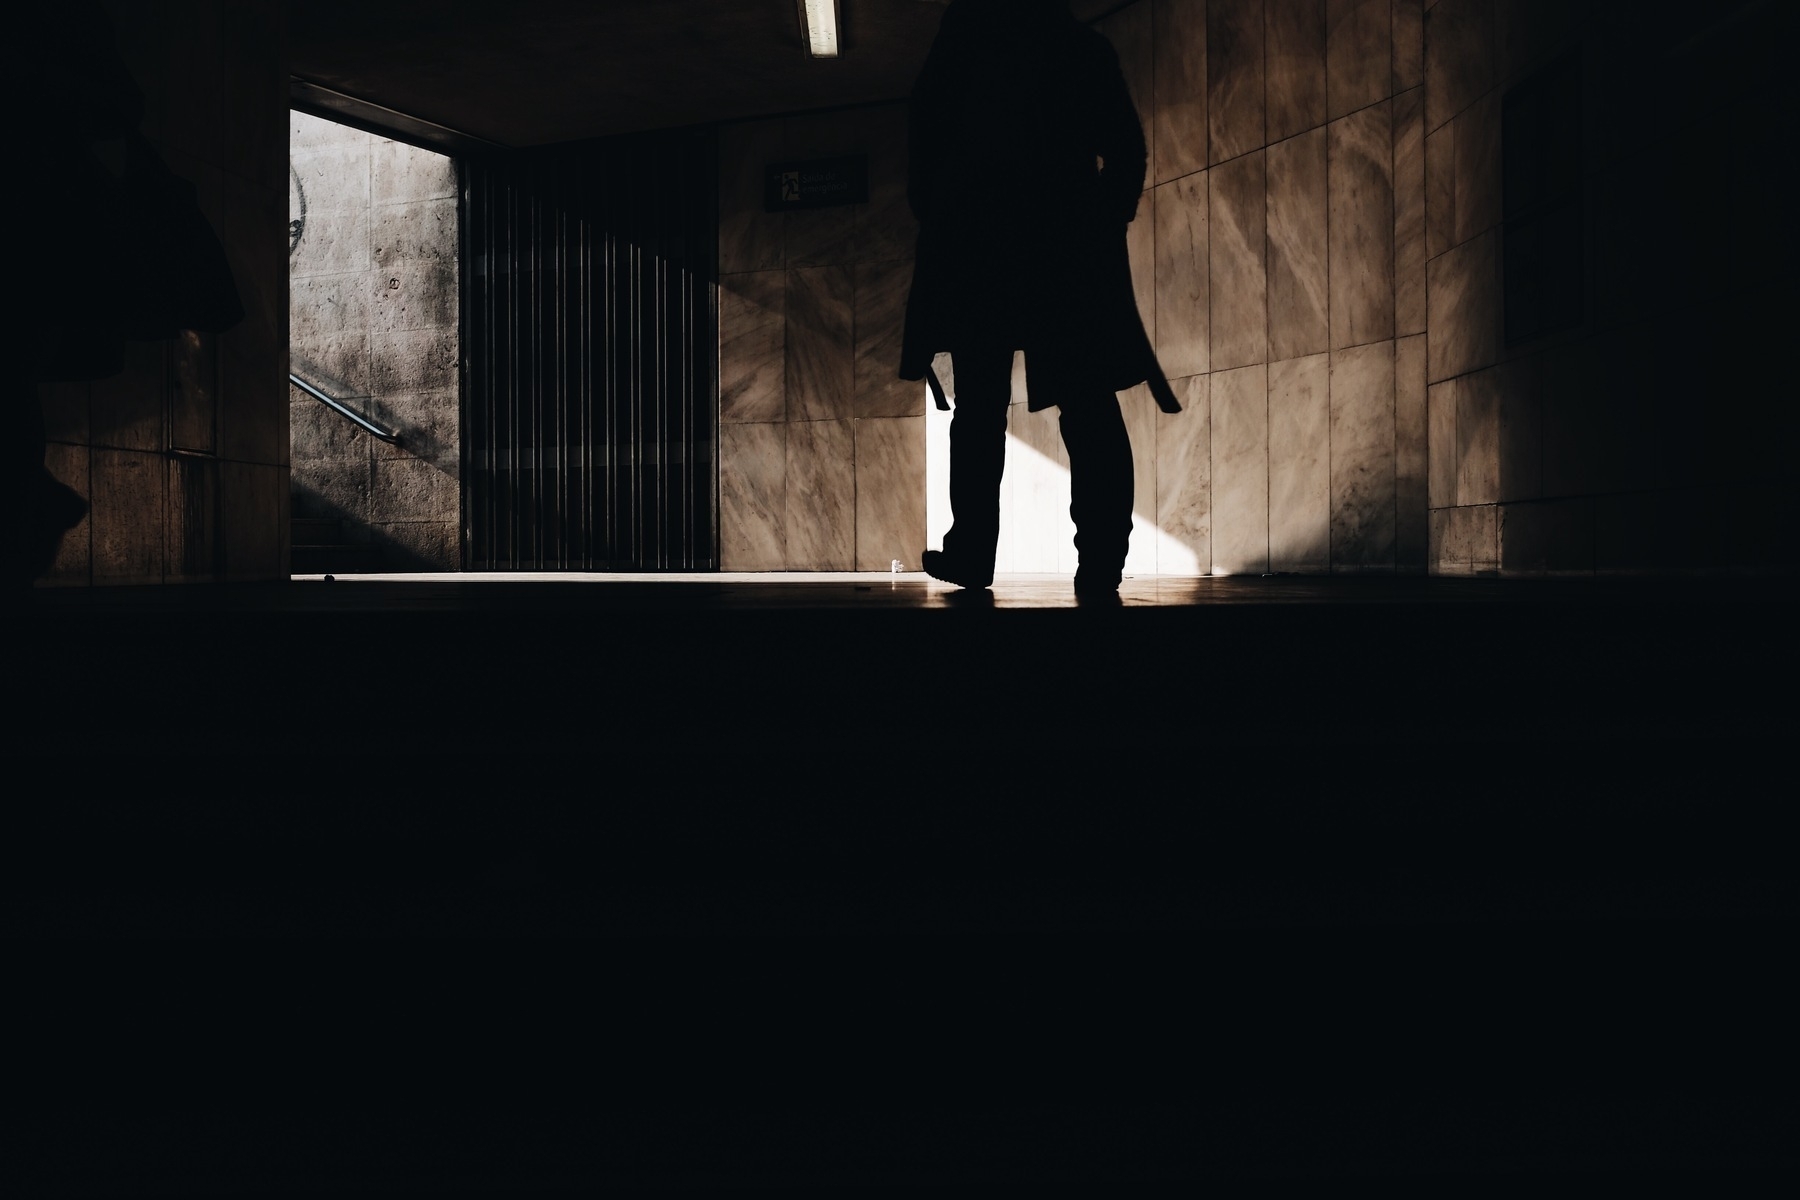 Dark photo showing a man walking towards an exit of the darkness.